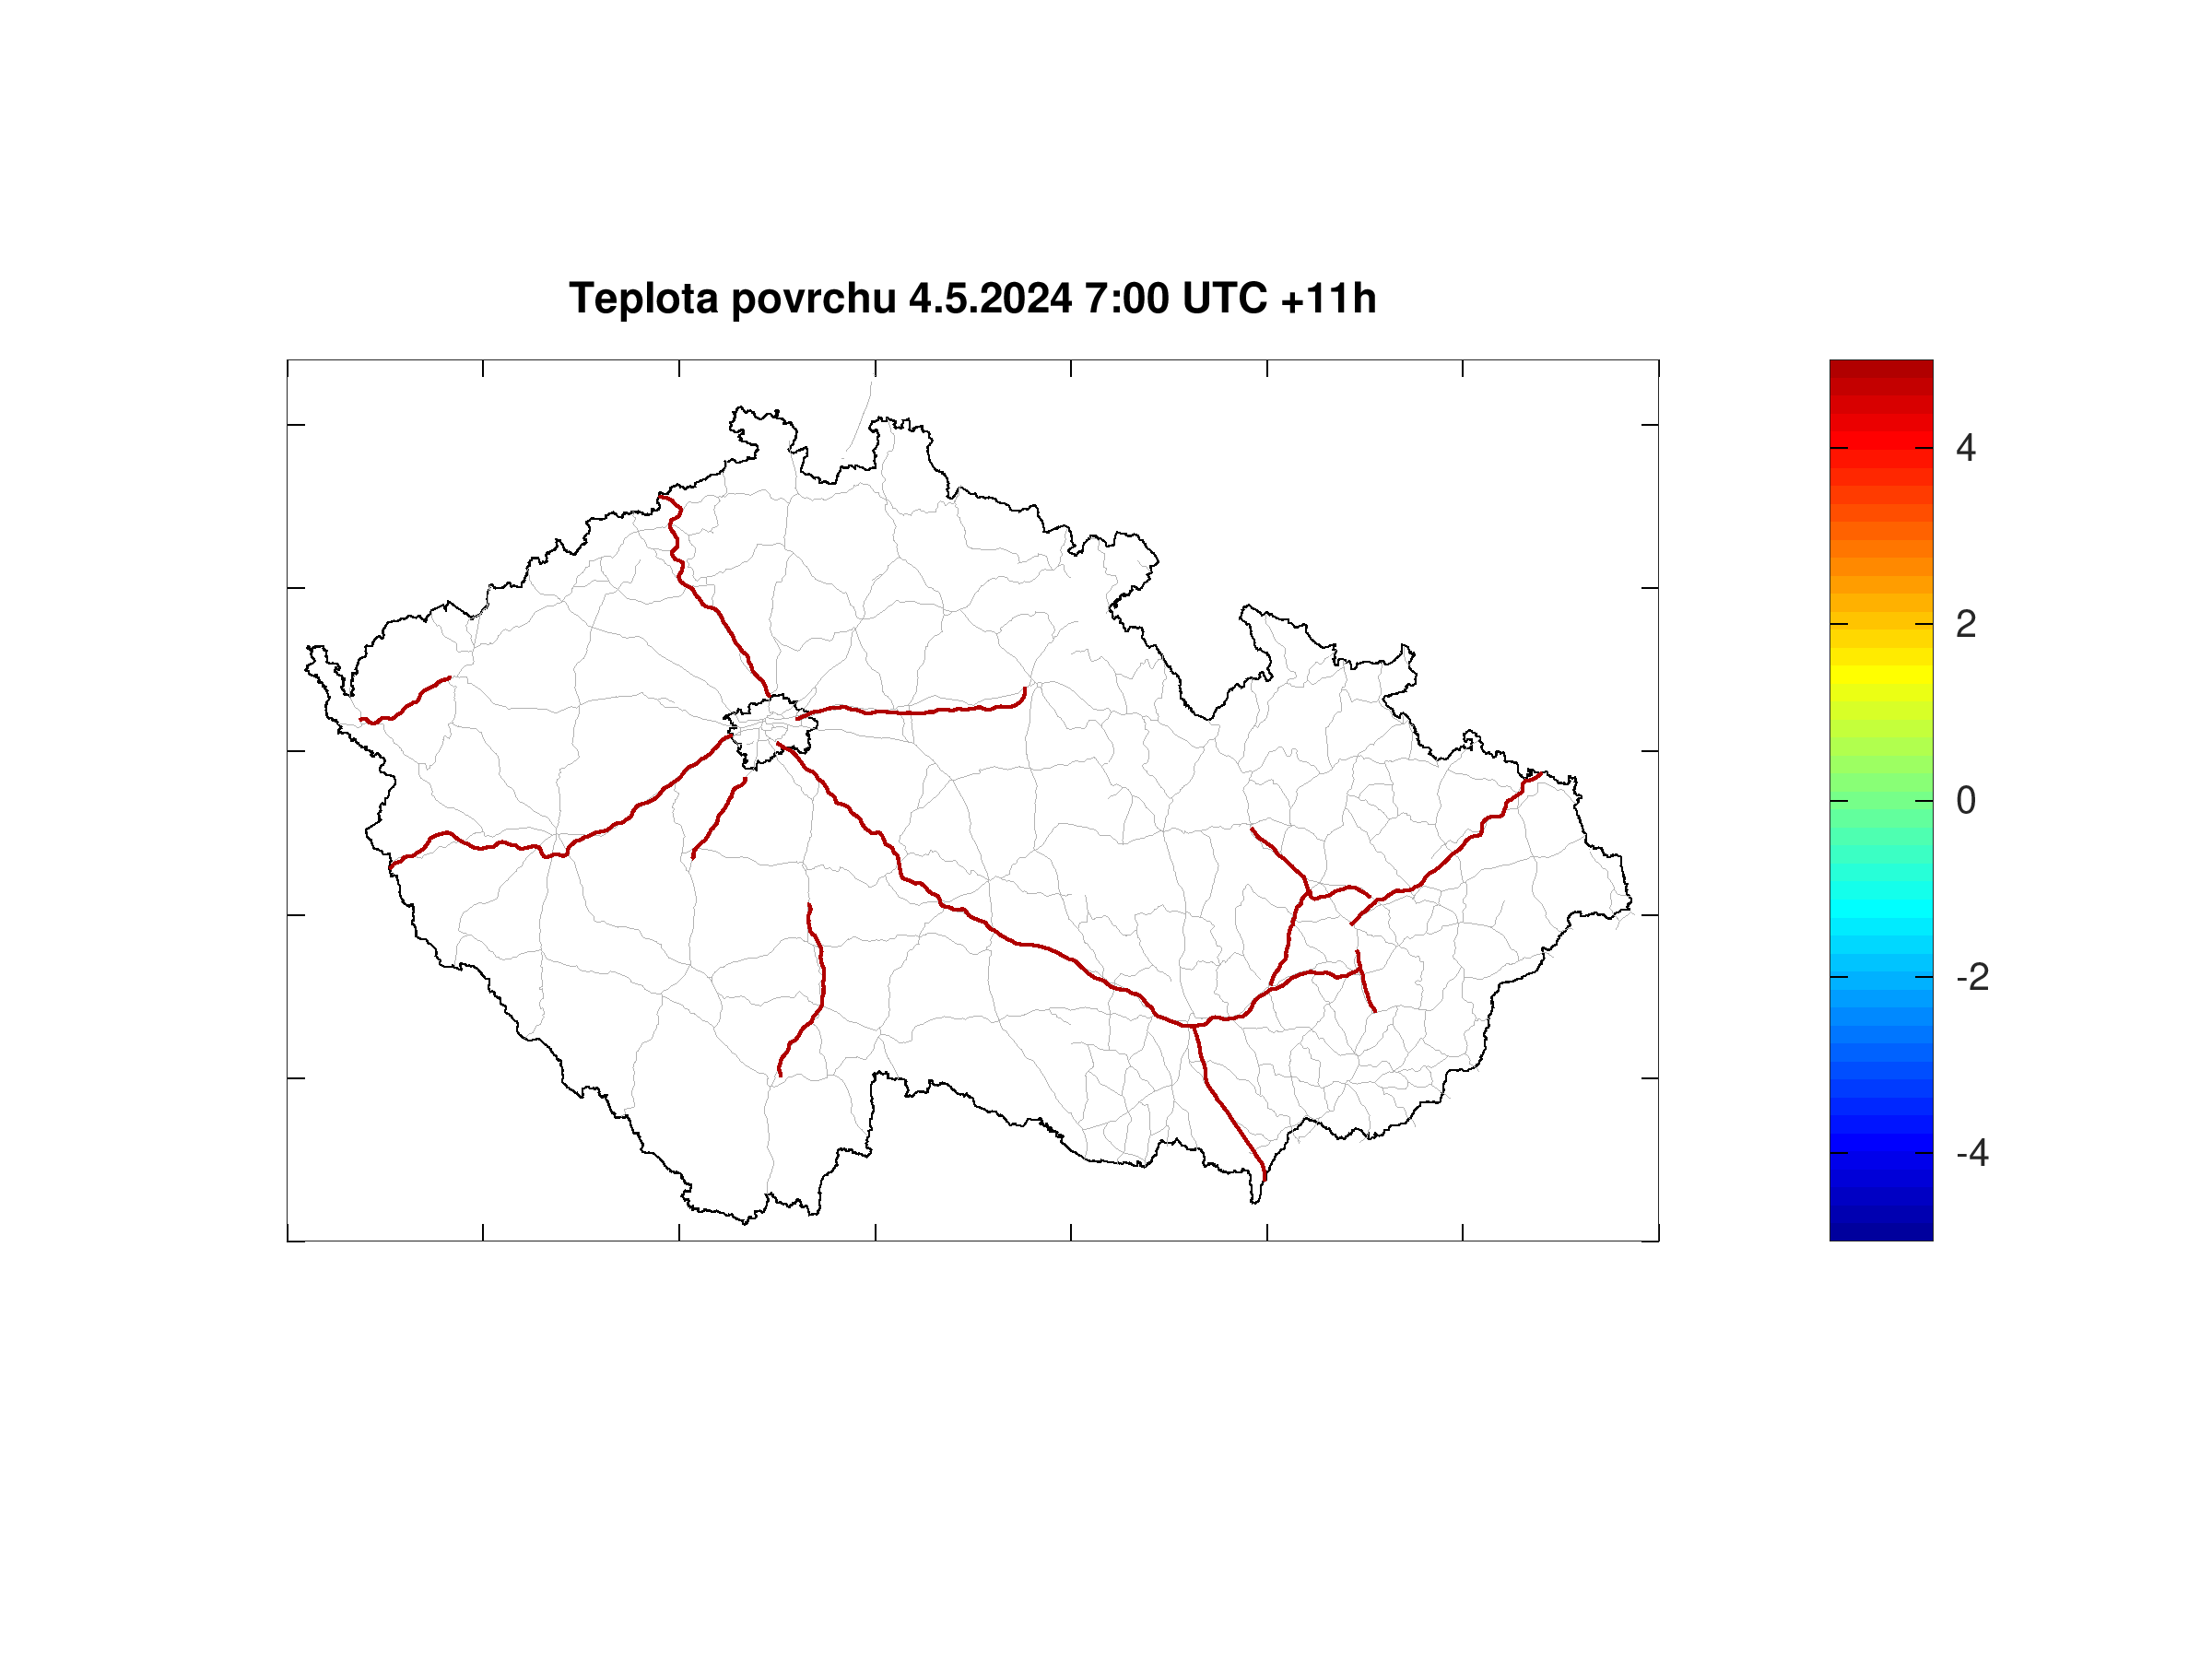 Road surface teperature forecast for Czech highways +11h